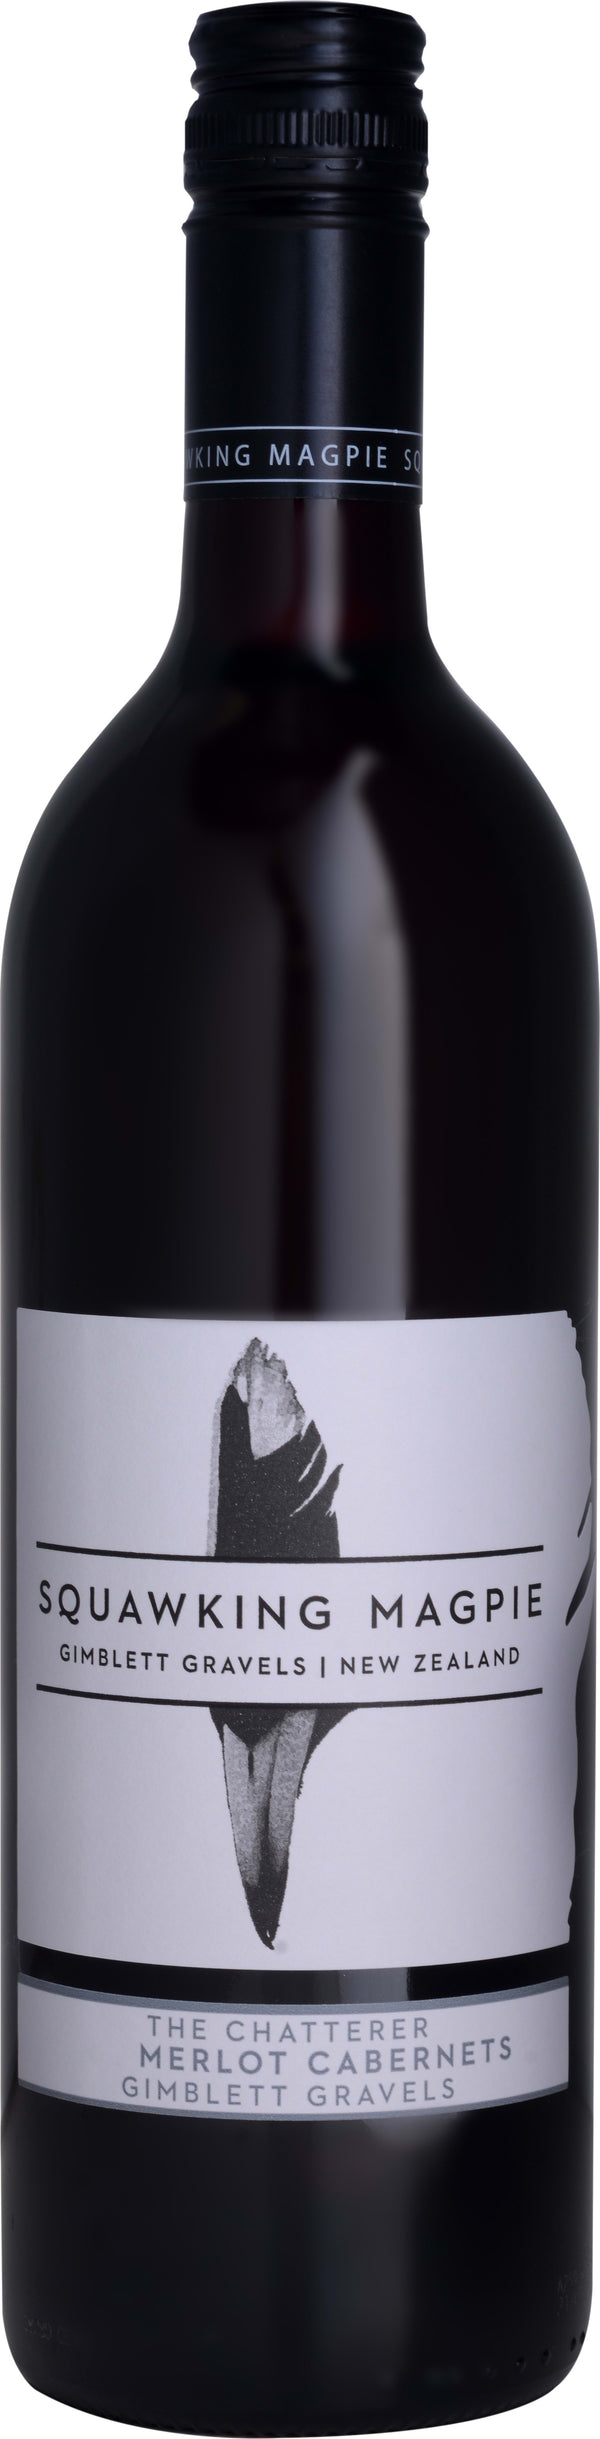 Squawking Magpie The Chatterer Merlot Cabernets 2020 6x75cl - Just Wines 